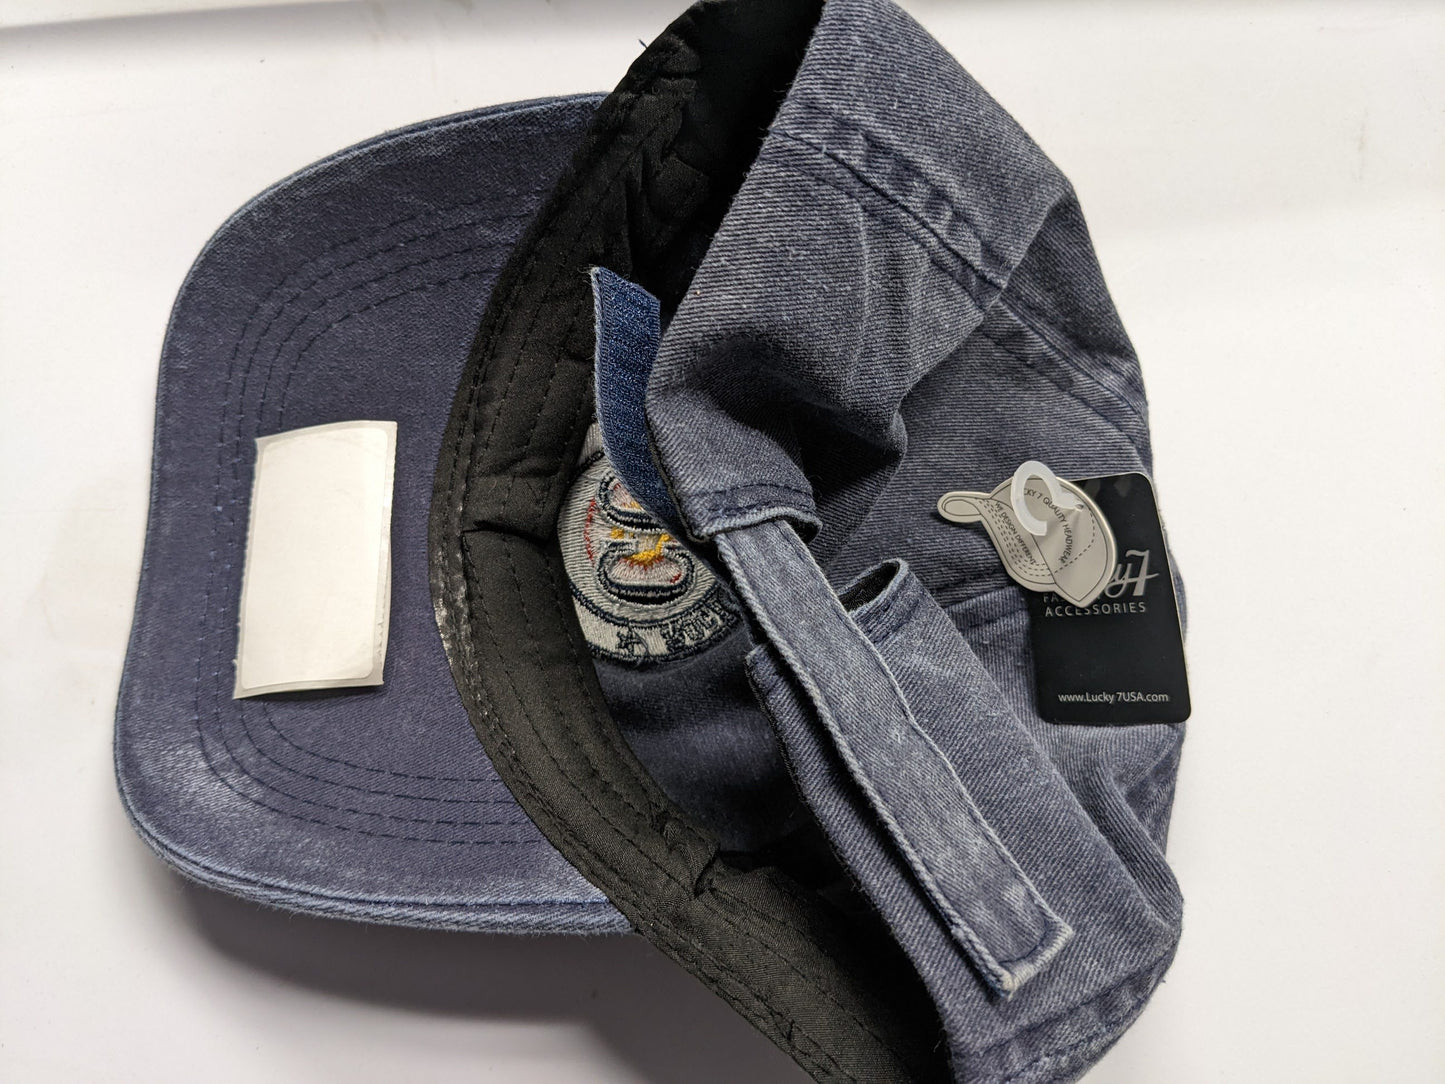 Lucky 7 Colorado Hats One Size Blue Denim NEW Clearance Locally